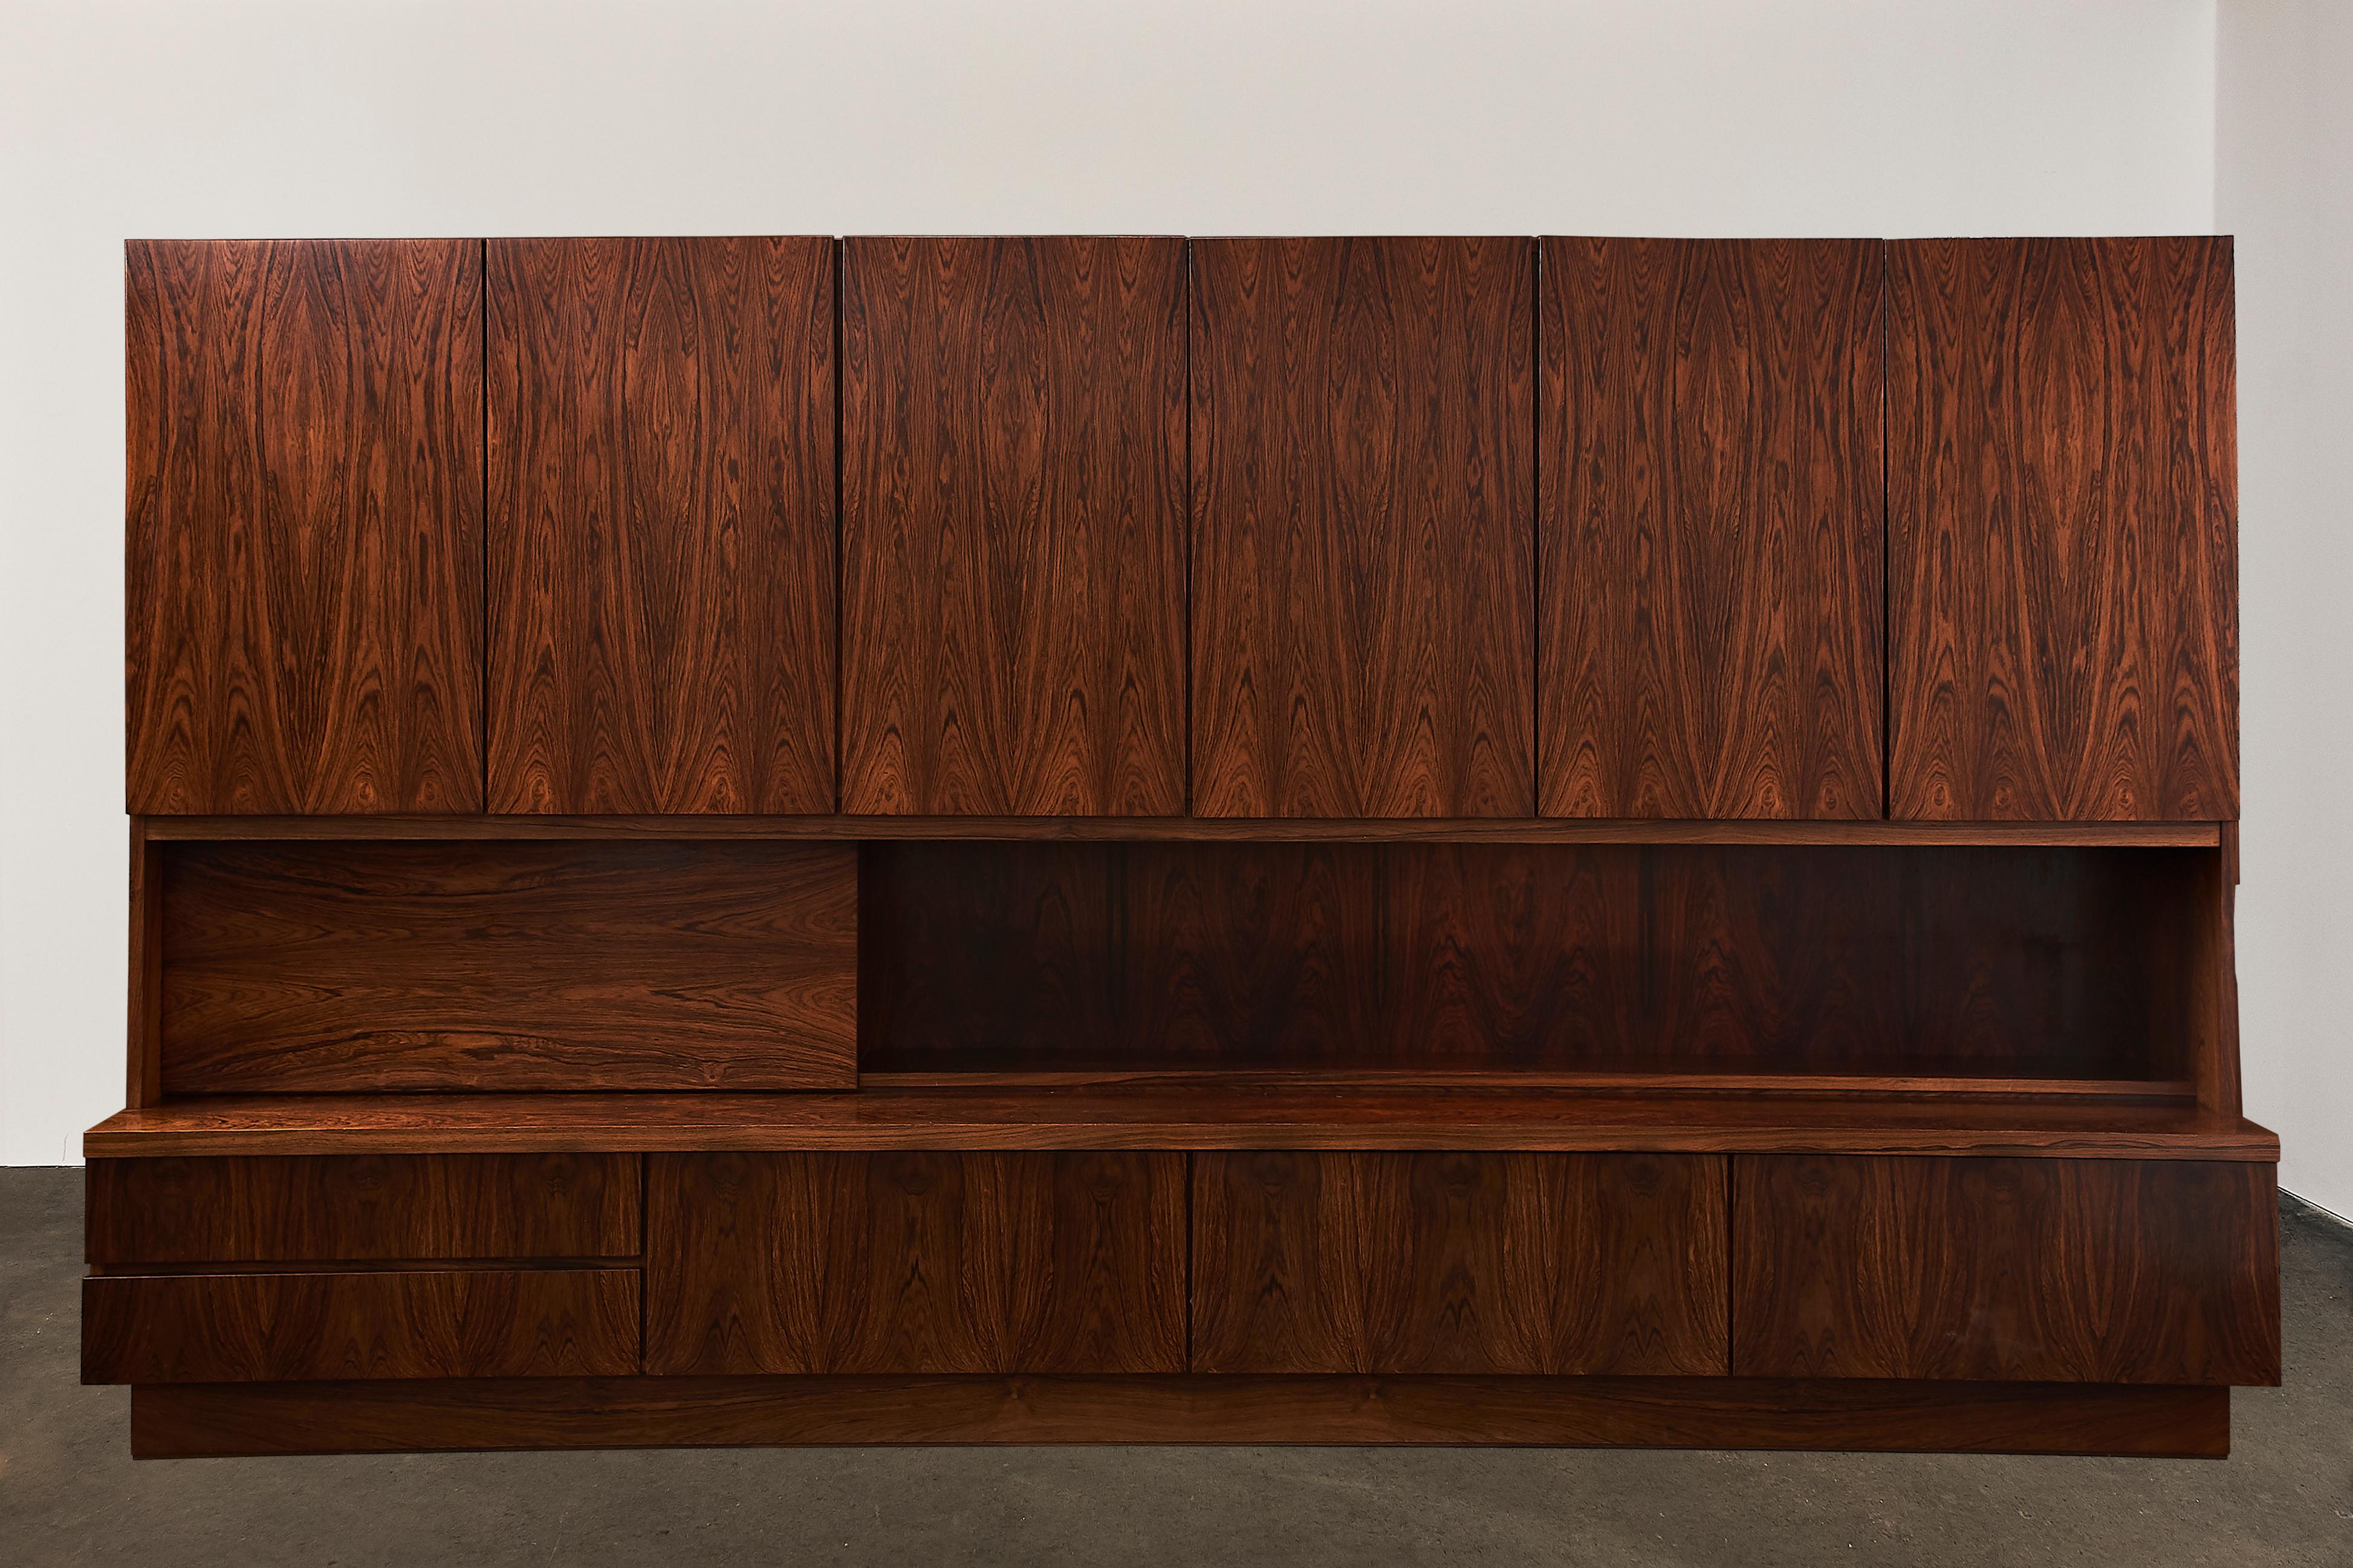 Monumental Mid-Century Modern wall unit with built-in bar, sideboard and myriad cabinetry.

Exceptionally beautiful cathedral cut and bookmatched rosewood. Interior compartments in tightly banded striped mahogany.

Highest quality craftsmanship